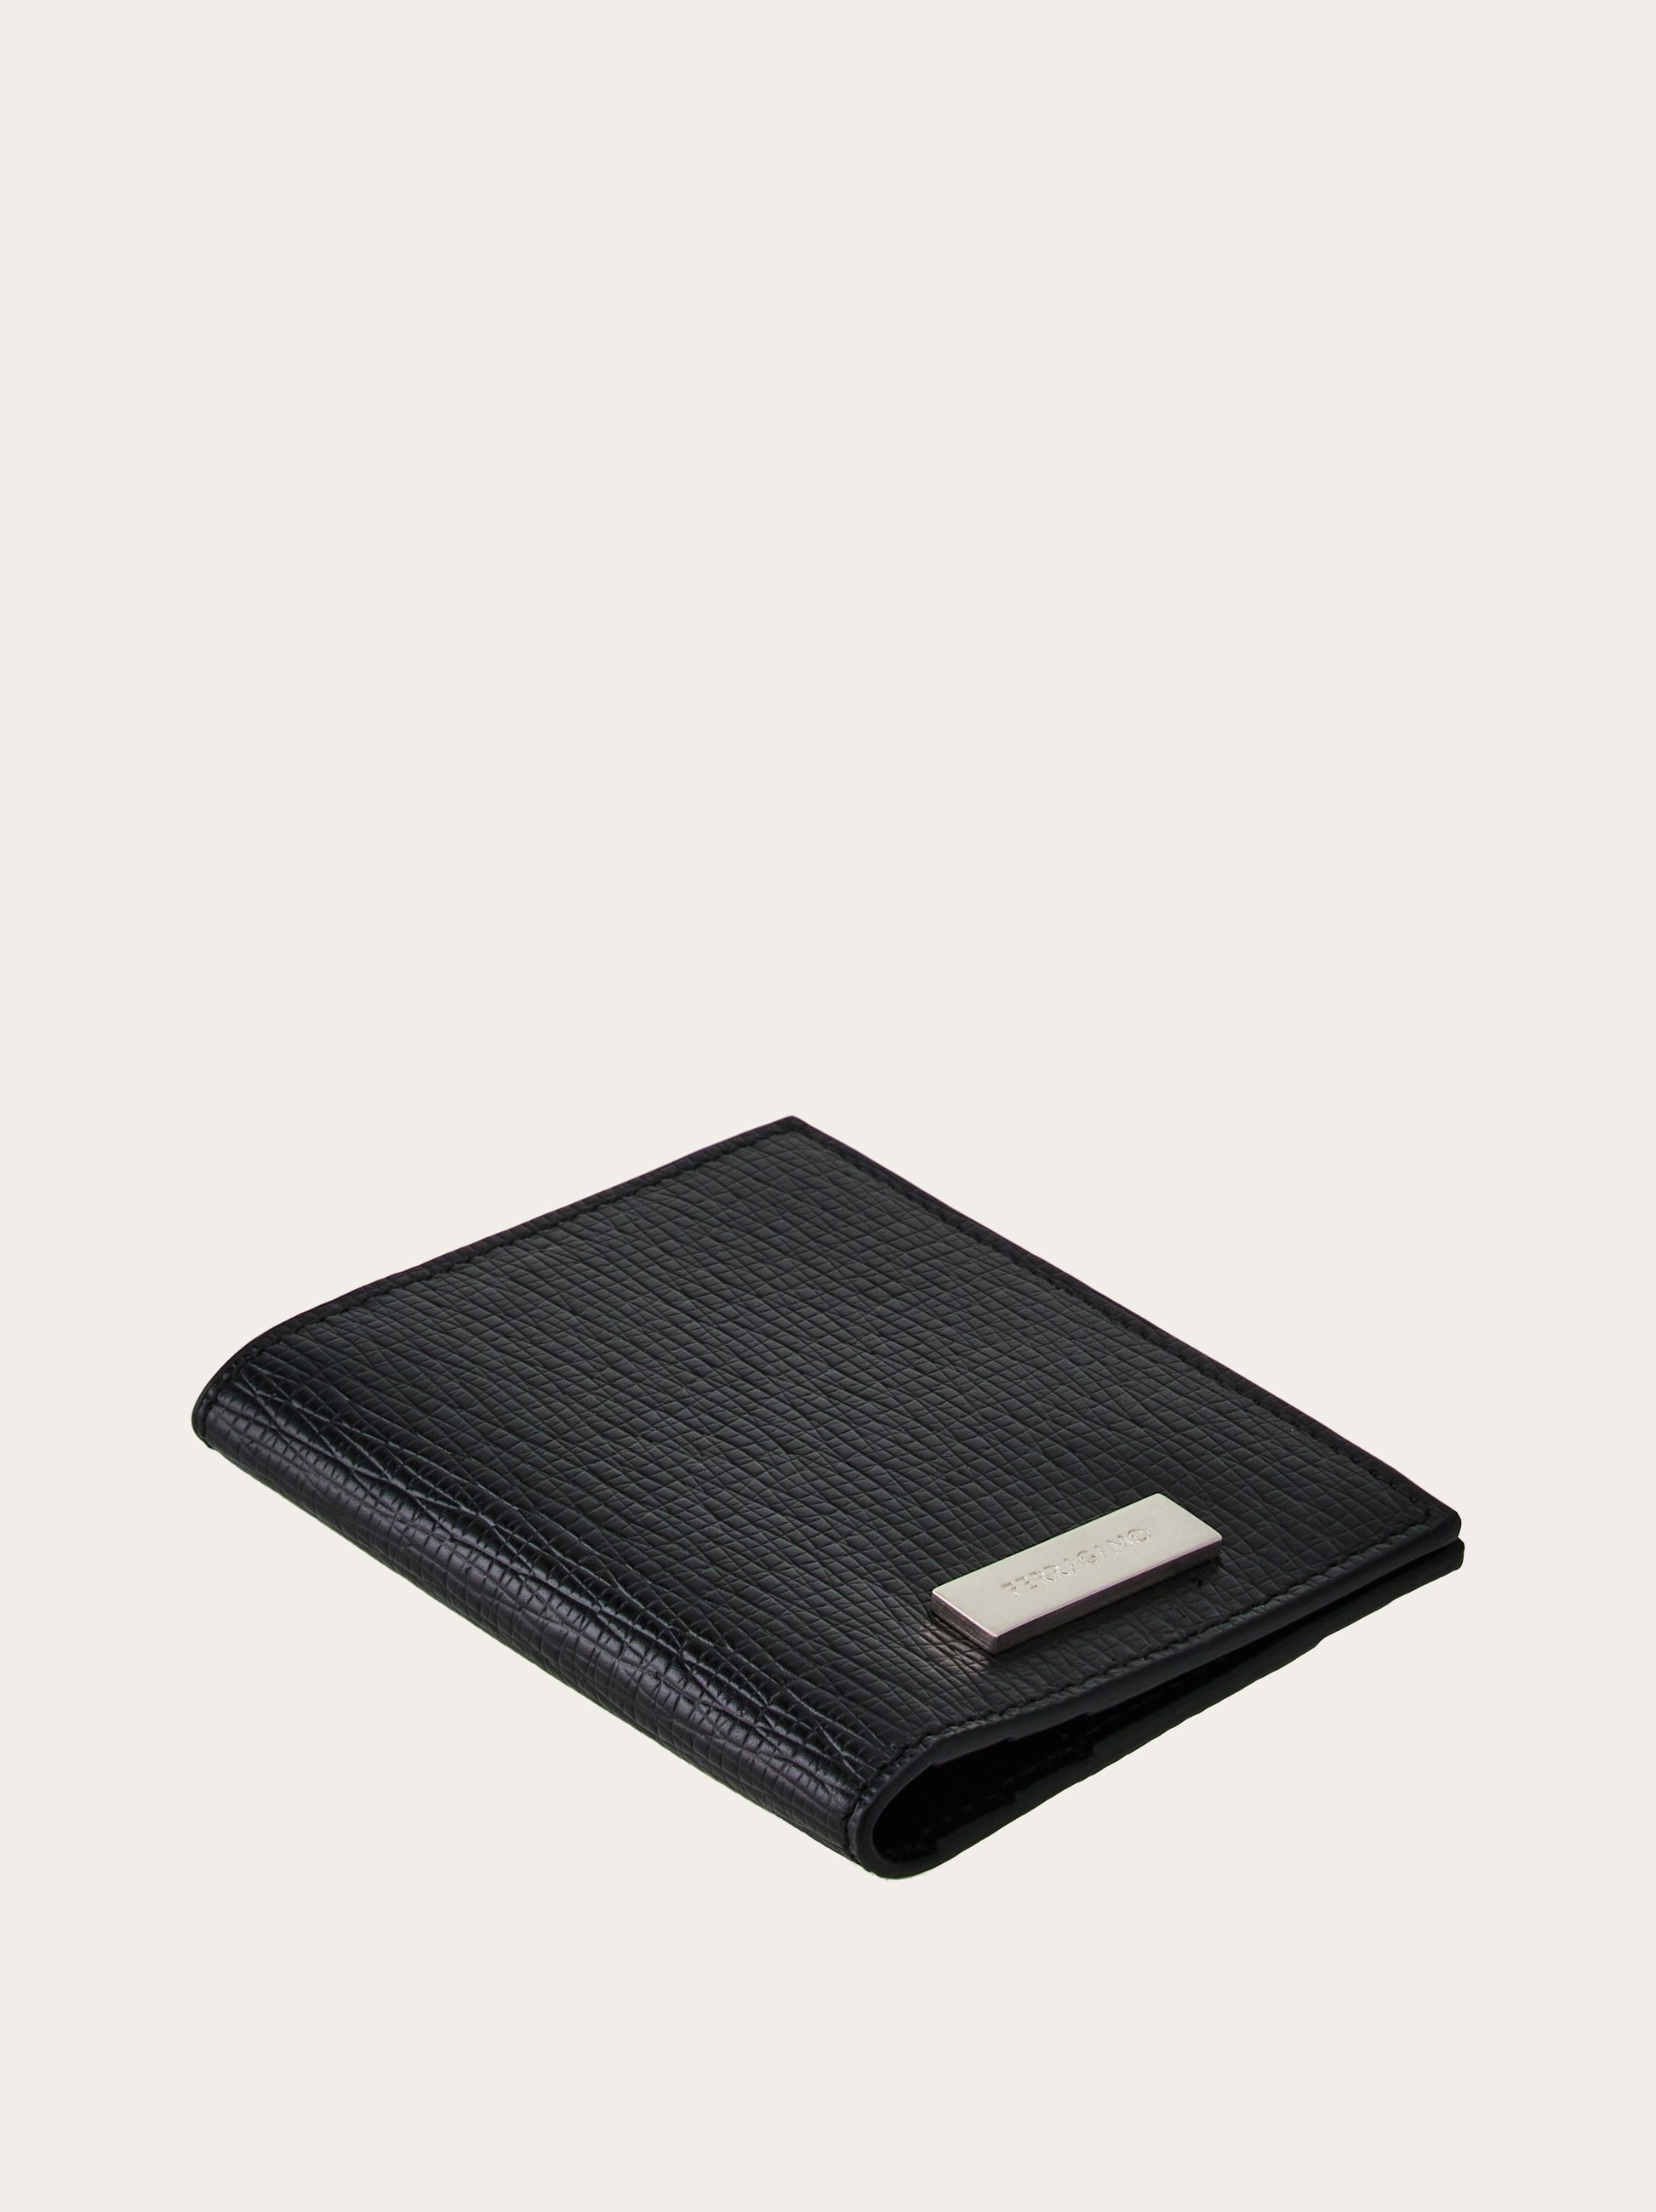 Credit card holder with custom metal plate - 2